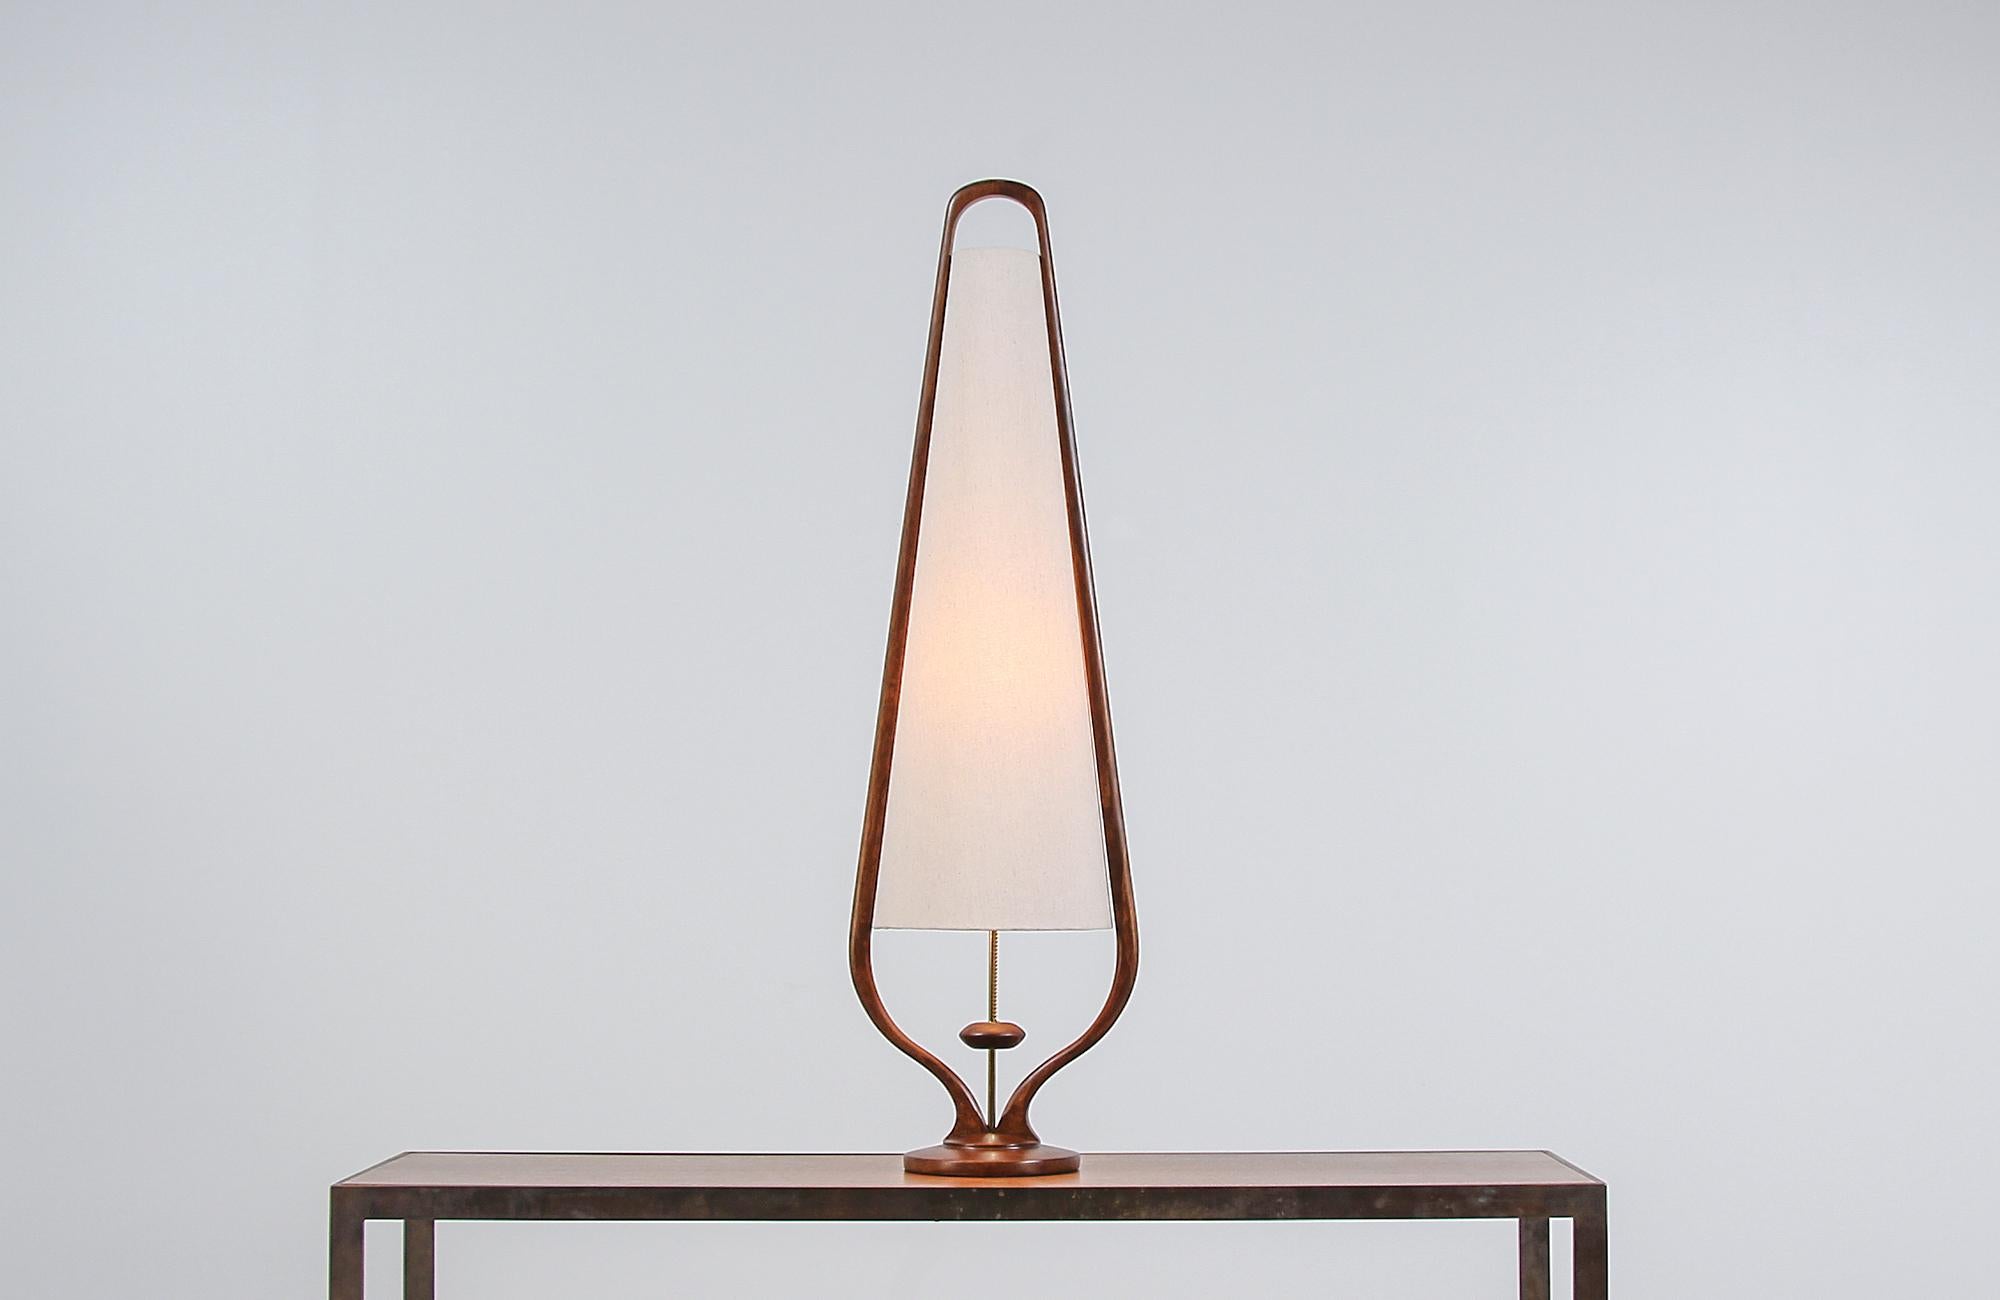 Modern table lamp designed and manufactured by Modeline of California in the United States circa 1960s. This tall table lamp features a rounded walnut wood base with a sculpted frame that embraces the new linen shade and accentuates the newly